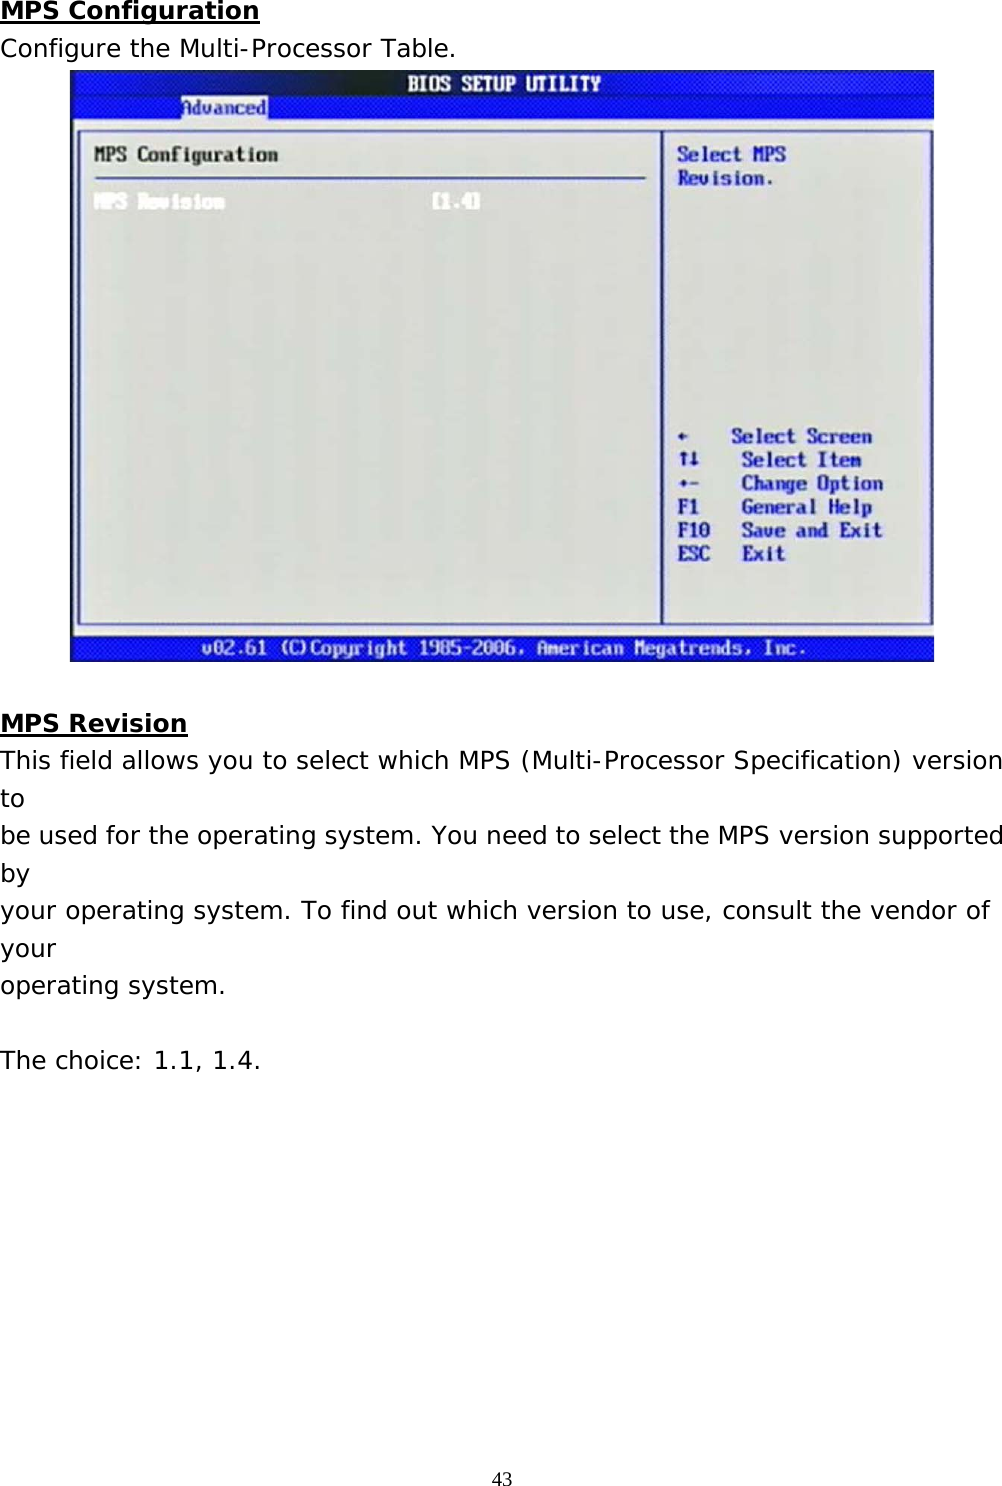  43 MPS Configuration Configure the Multi-Processor Table.   MPS Revision This field allows you to select which MPS (Multi-Processor Specification) version to be used for the operating system. You need to select the MPS version supported by your operating system. To find out which version to use, consult the vendor of your operating system.  The choice: 1.1, 1.4.          